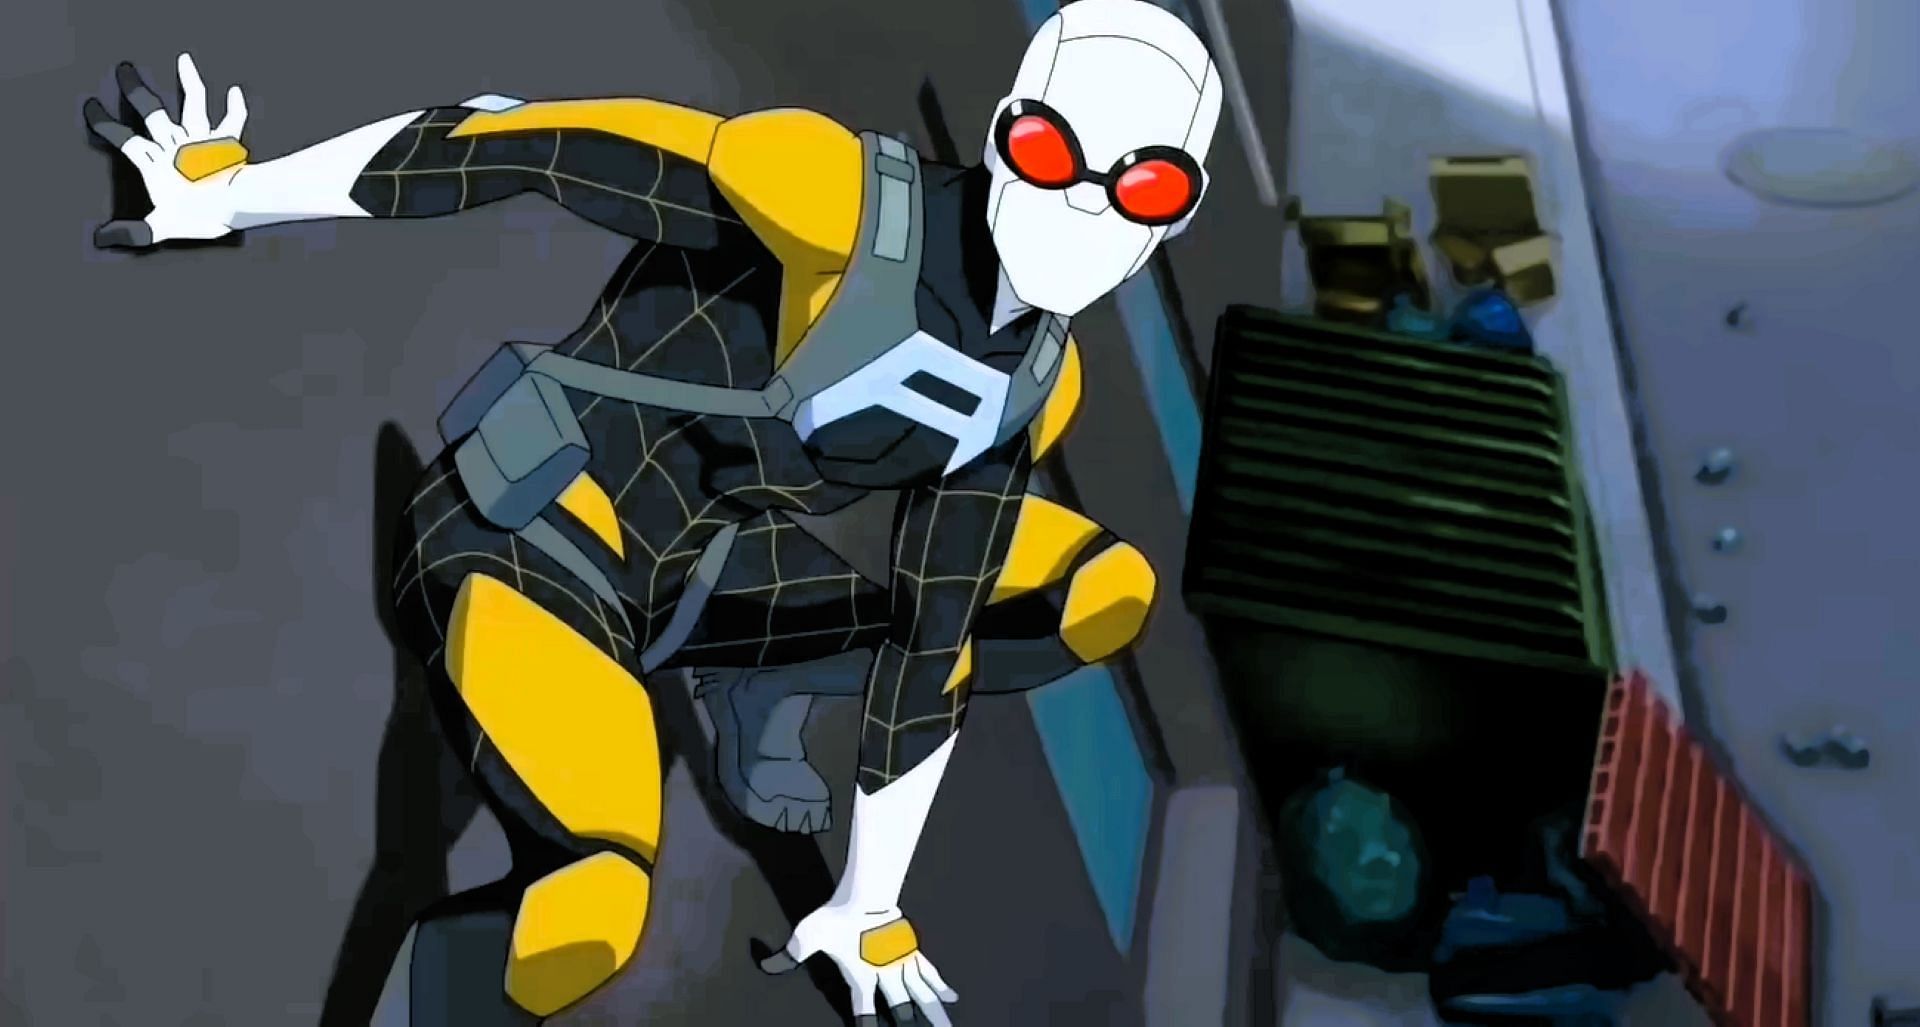 Invincible season 2 has its very own Spider-Man in the form of Agent Spider (Image via Youtube/Prime Video)